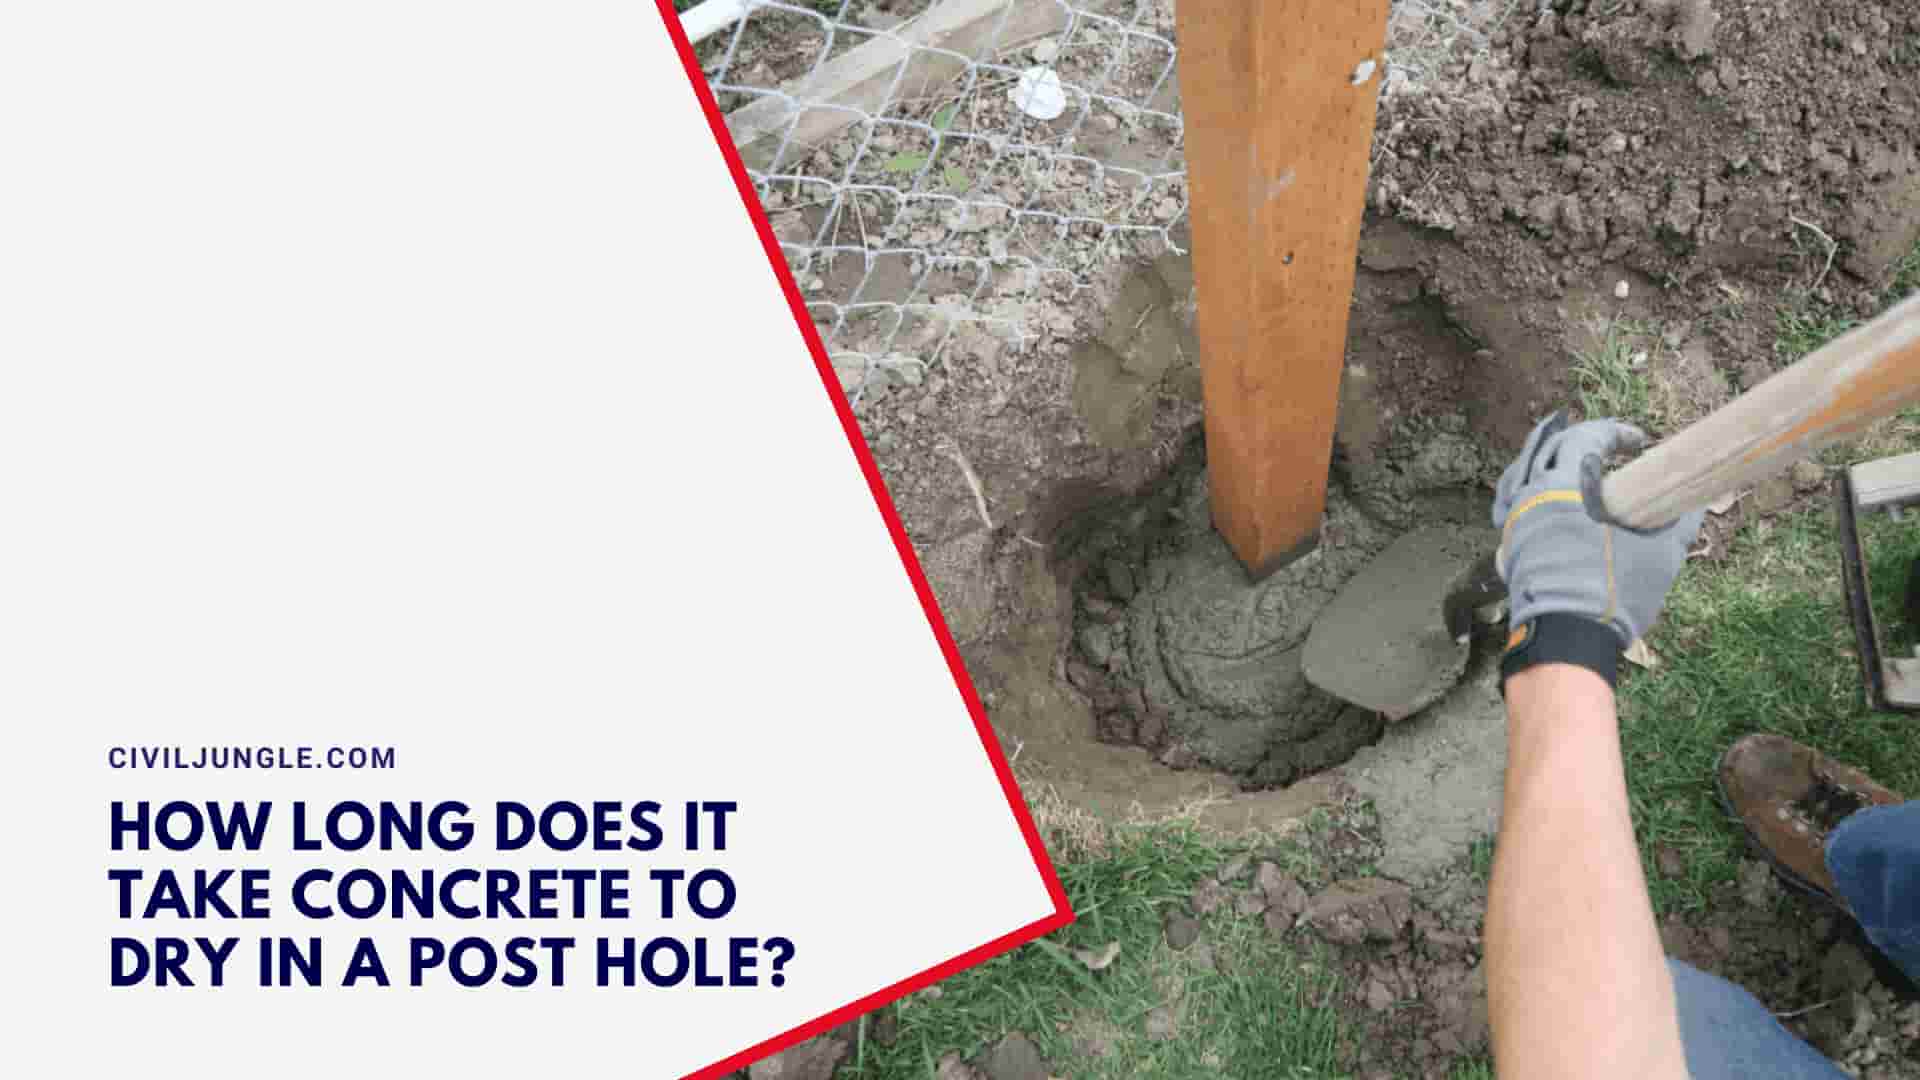 How Long Does It Take Concrete To Dry In A Post Hole?